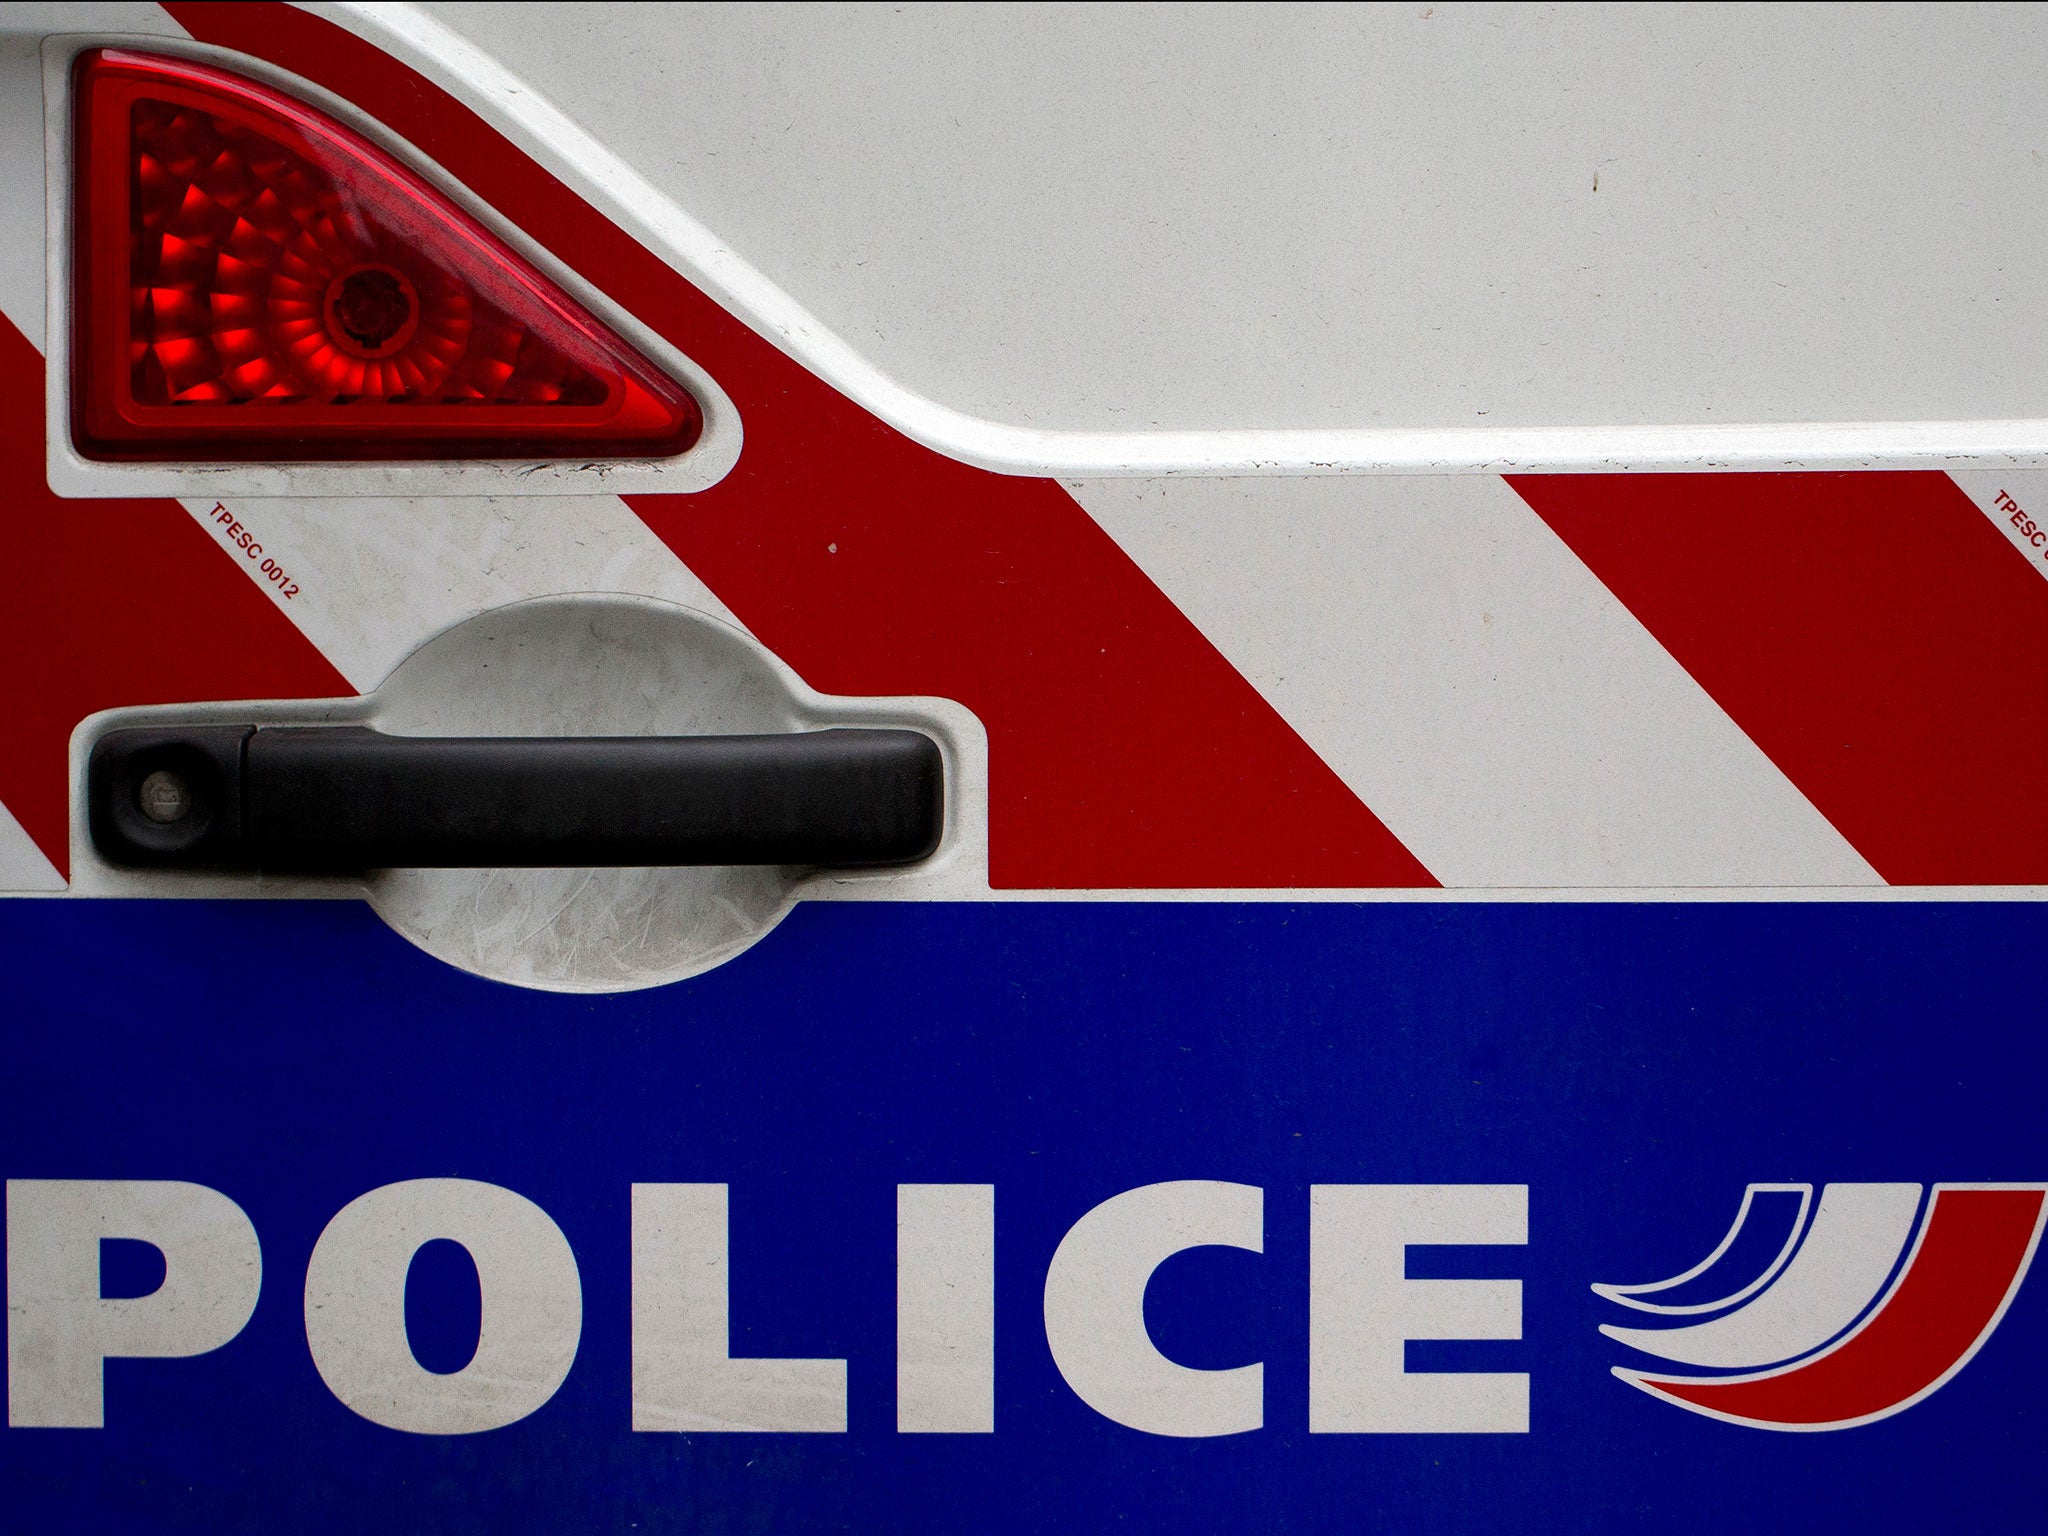 French police say the 50 year old man is currently in custody